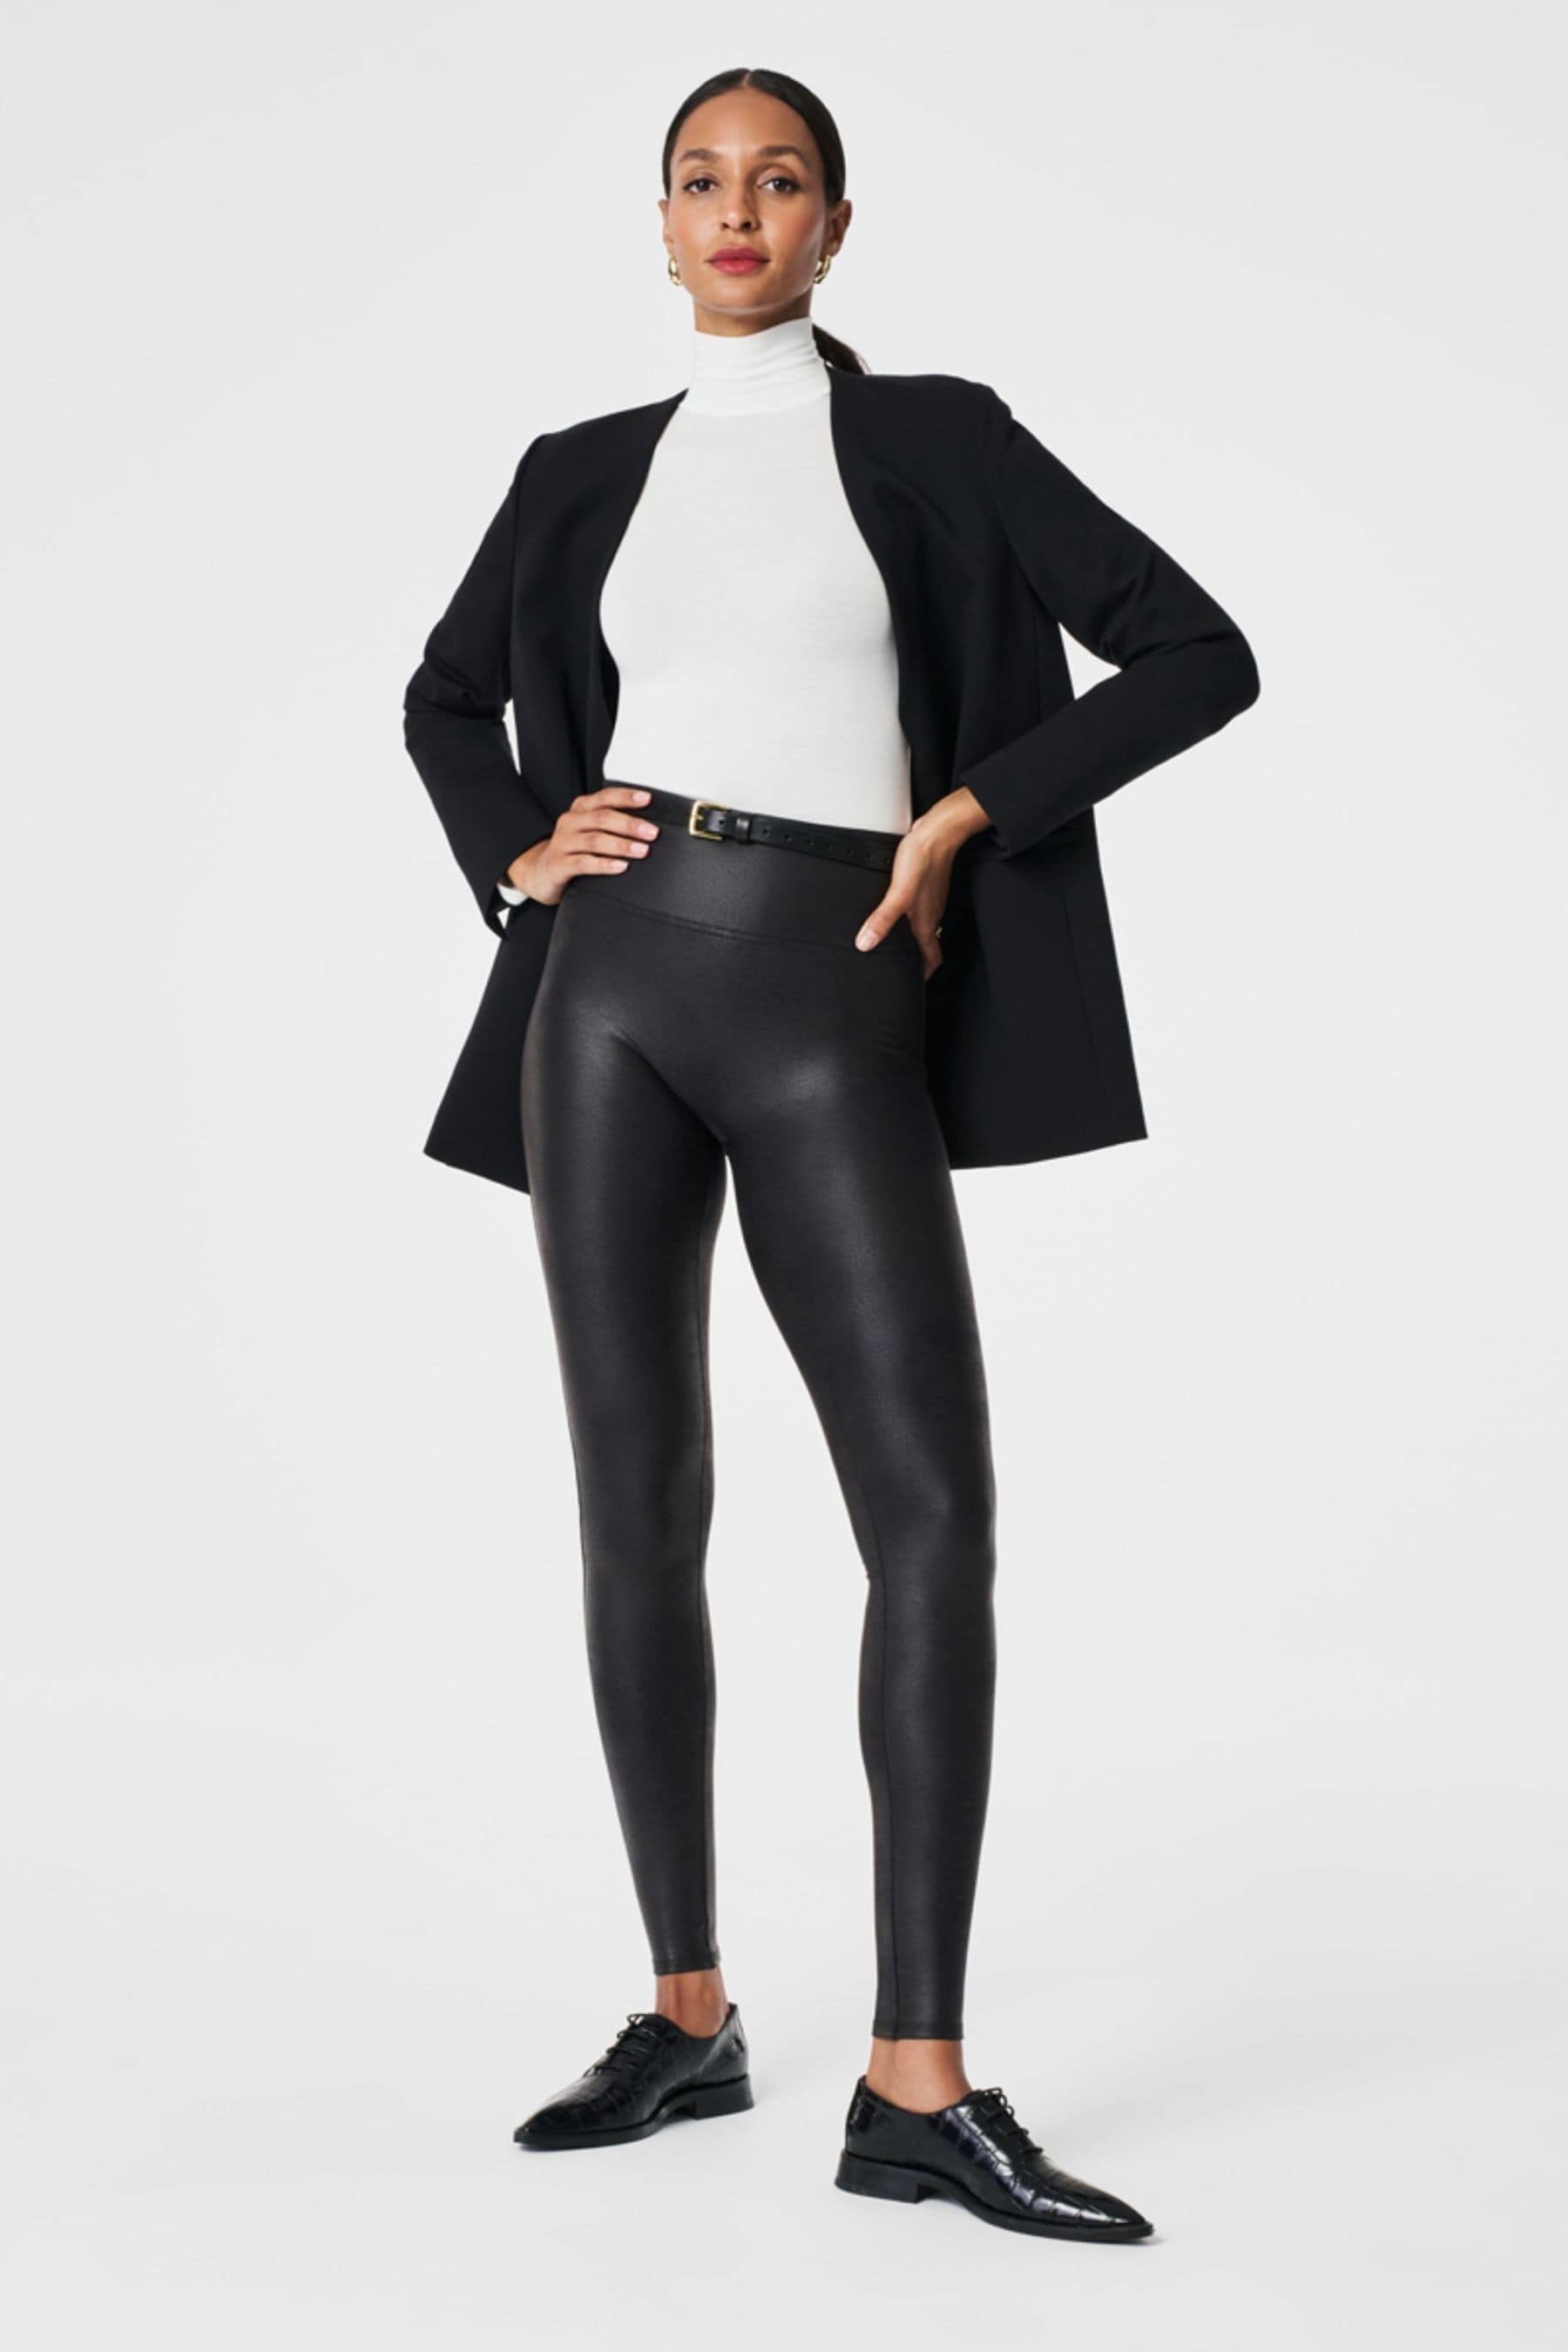 Assets By Spanx All Over Faux Leather Leggings Black High Waist Womens 1X